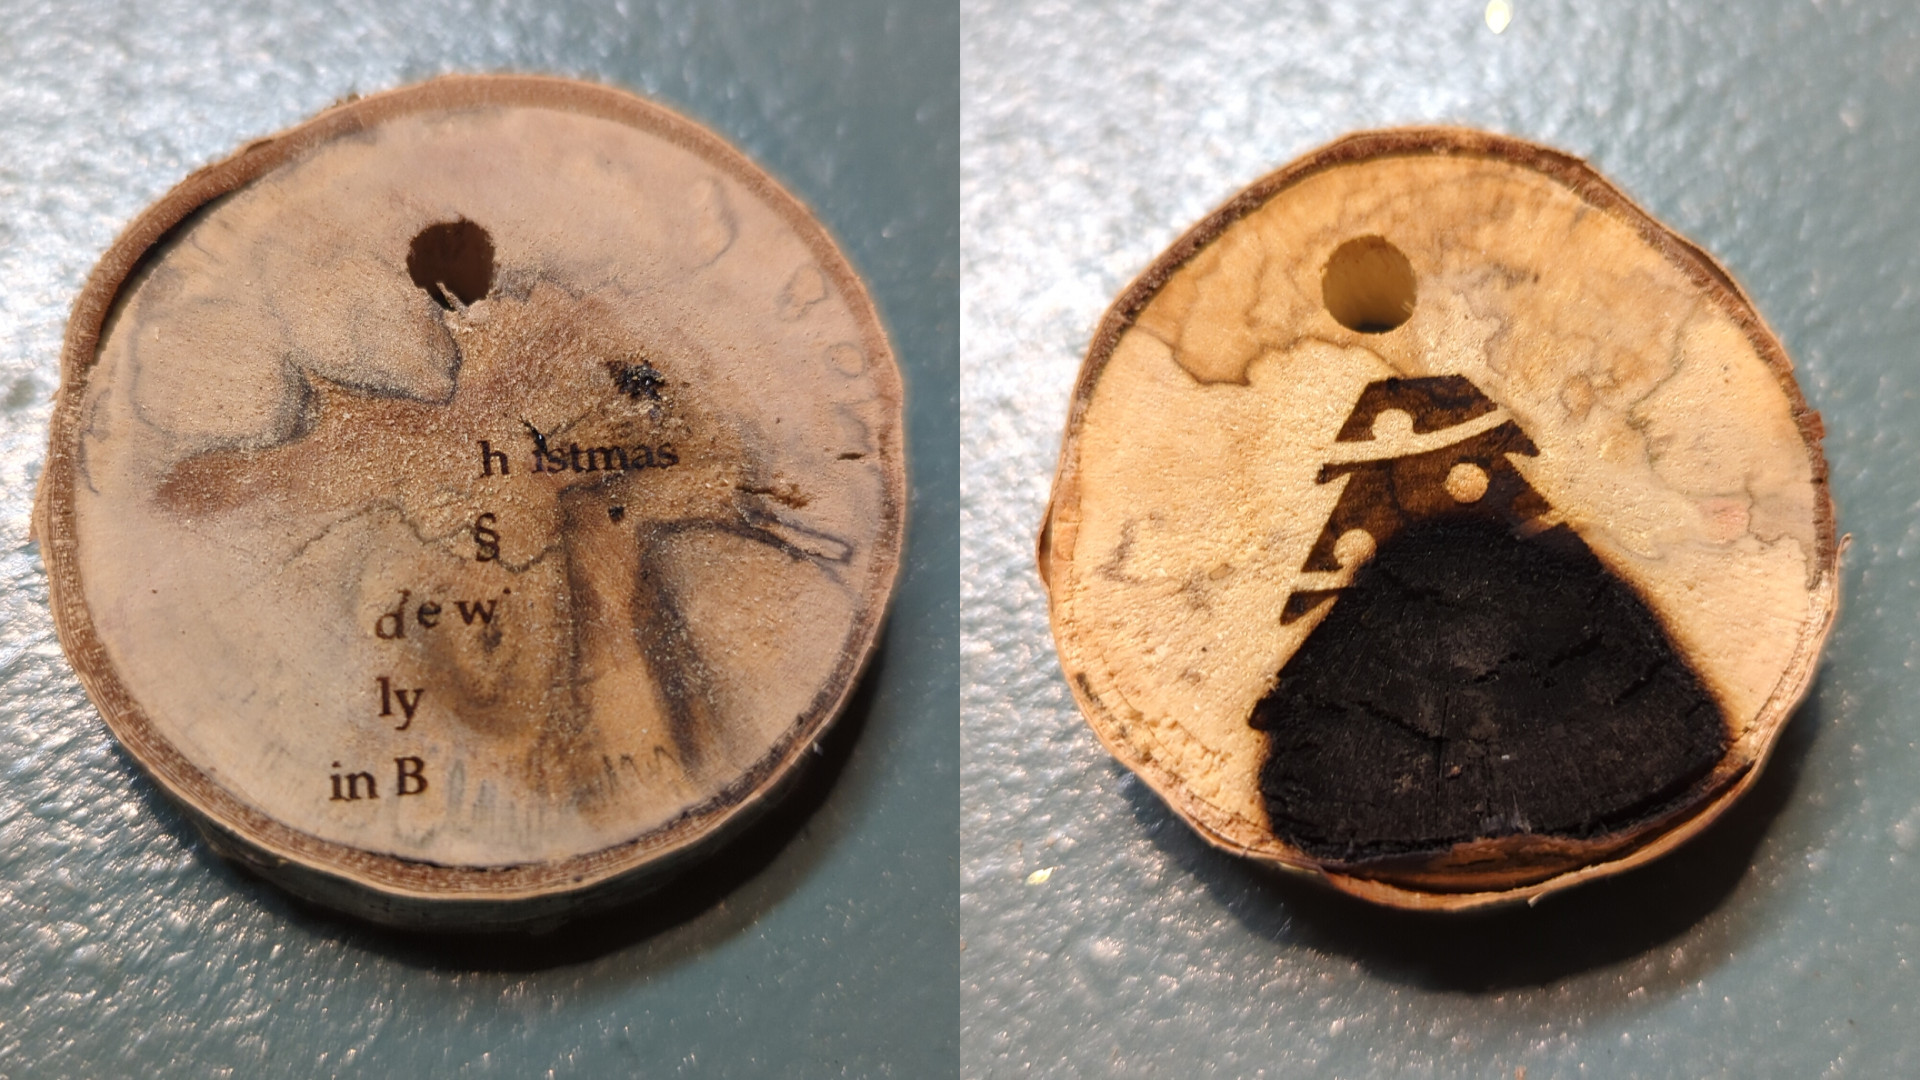 Left: An incomplete etch that failed because the laser tip collided with the puck; Right: A puck that burned slightly and left a large black hole across part of the puck’s face